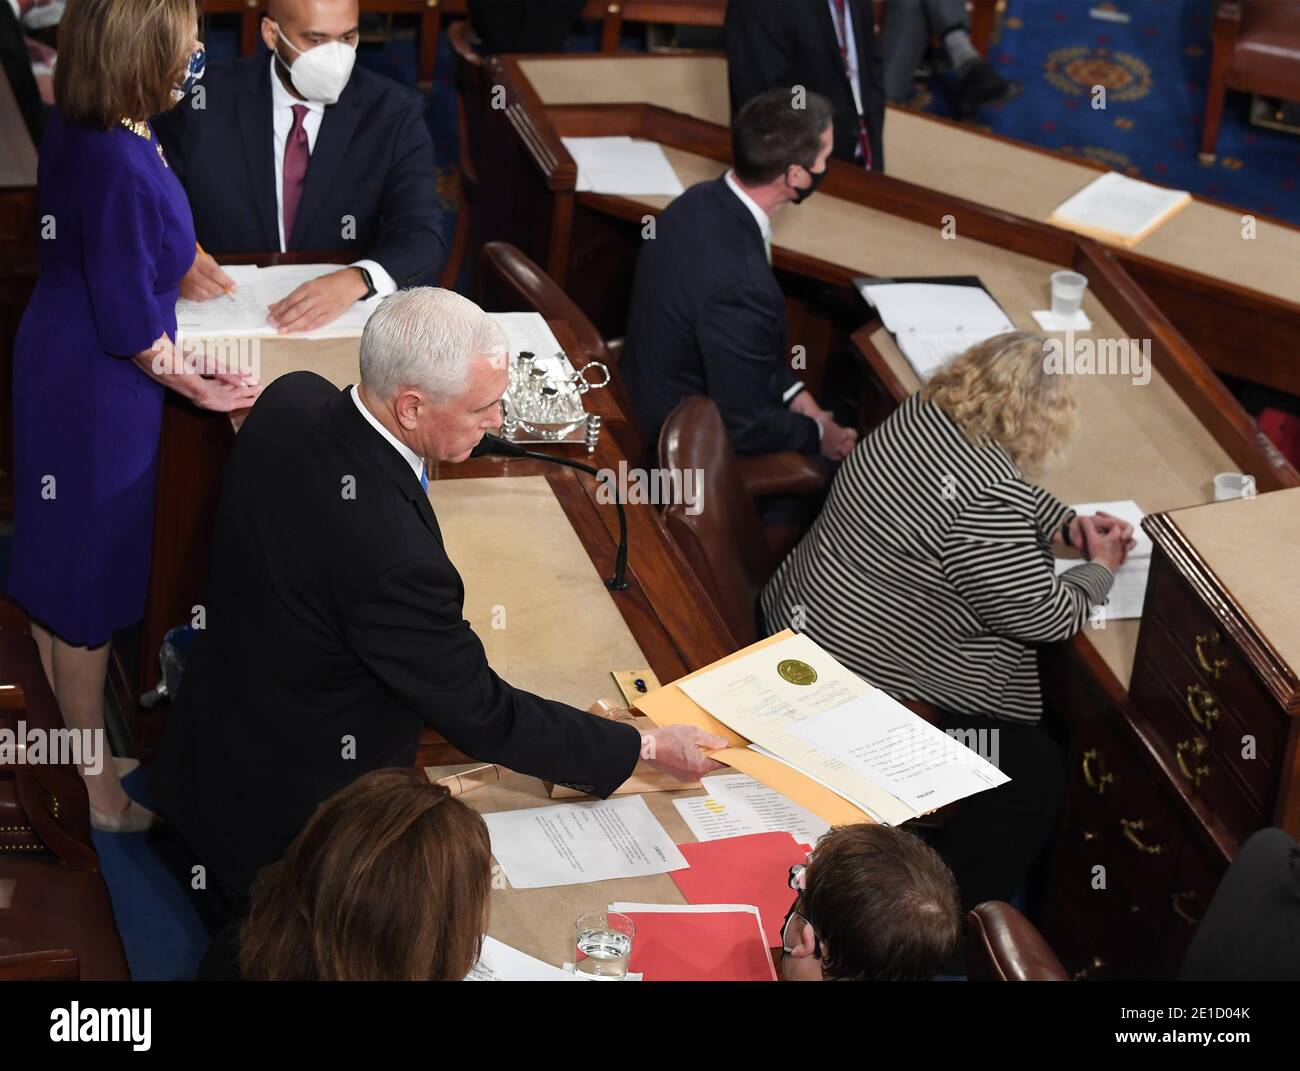 Washington, United States. 06th Jan, 2021. Vice President Mike Pence receives written objections from the State of Arizona to certification of the state's Electoral College votes during a joint session of Congtess the U.S. Capitol in Washington, DC on Wednesday, January 6, 2021. Congress counts the Electoral College votes today in a joint session. Photo by Pat Benic/UPI Credit: UPI/Alamy Live News Stock Photo